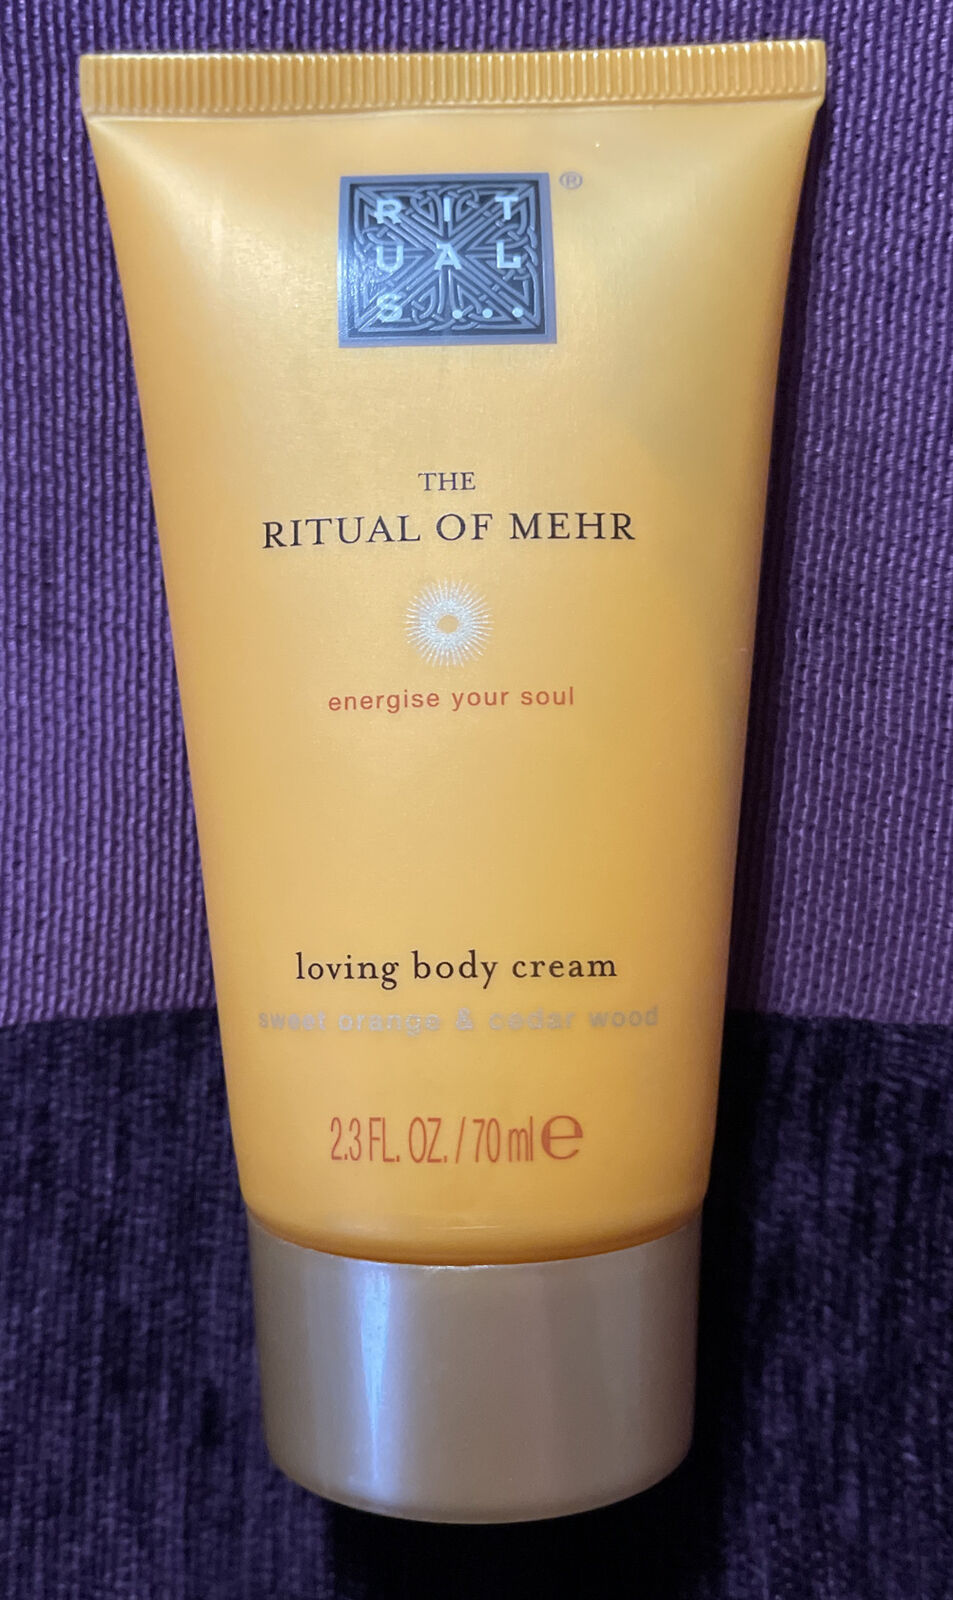 Rituals of Mehr Find Out More - Boots